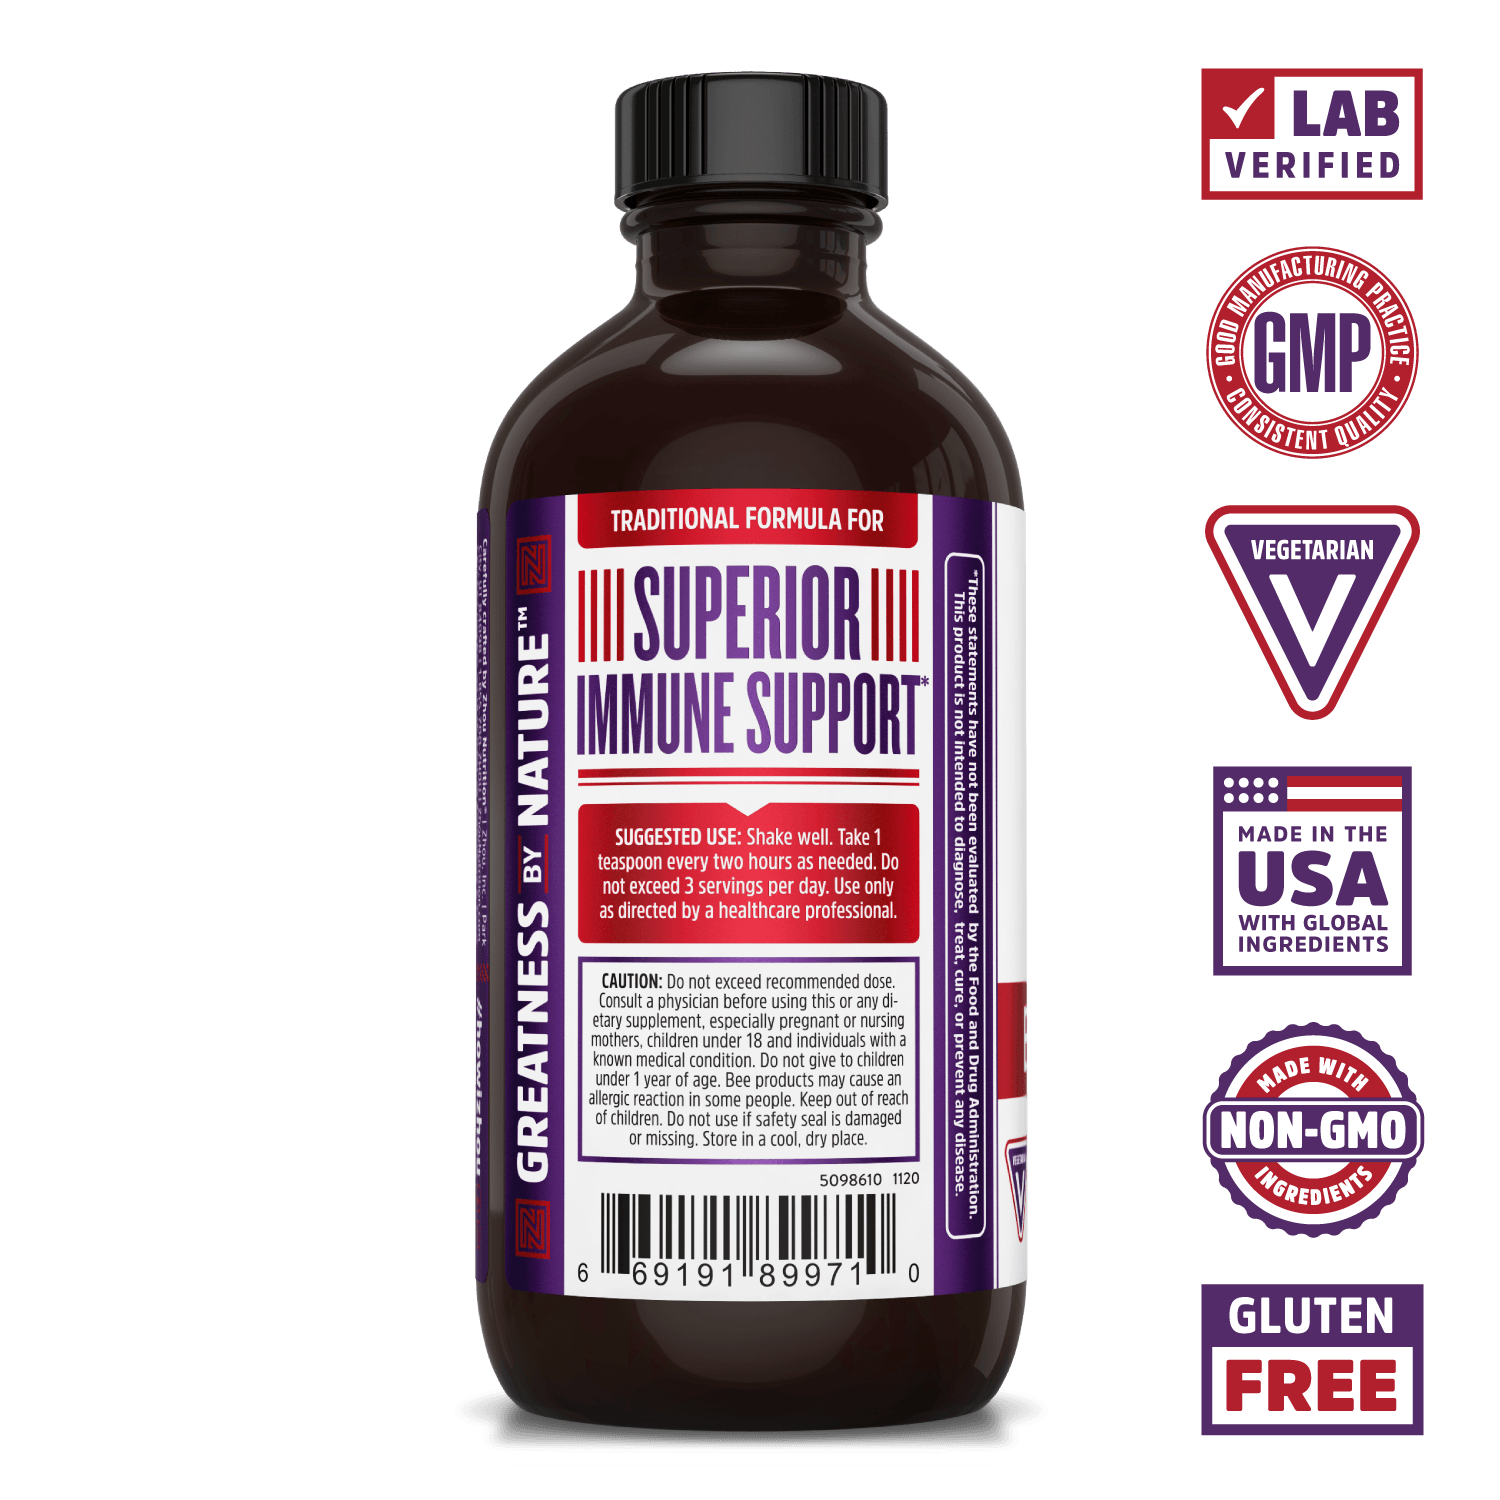 Zhou Nutrition Superior Immune Support. Bottle side. Lab verified, good manufacturing practices, vegetarian, made in the USA with global ingredients, made with non-GMO ingredients, gluten free.